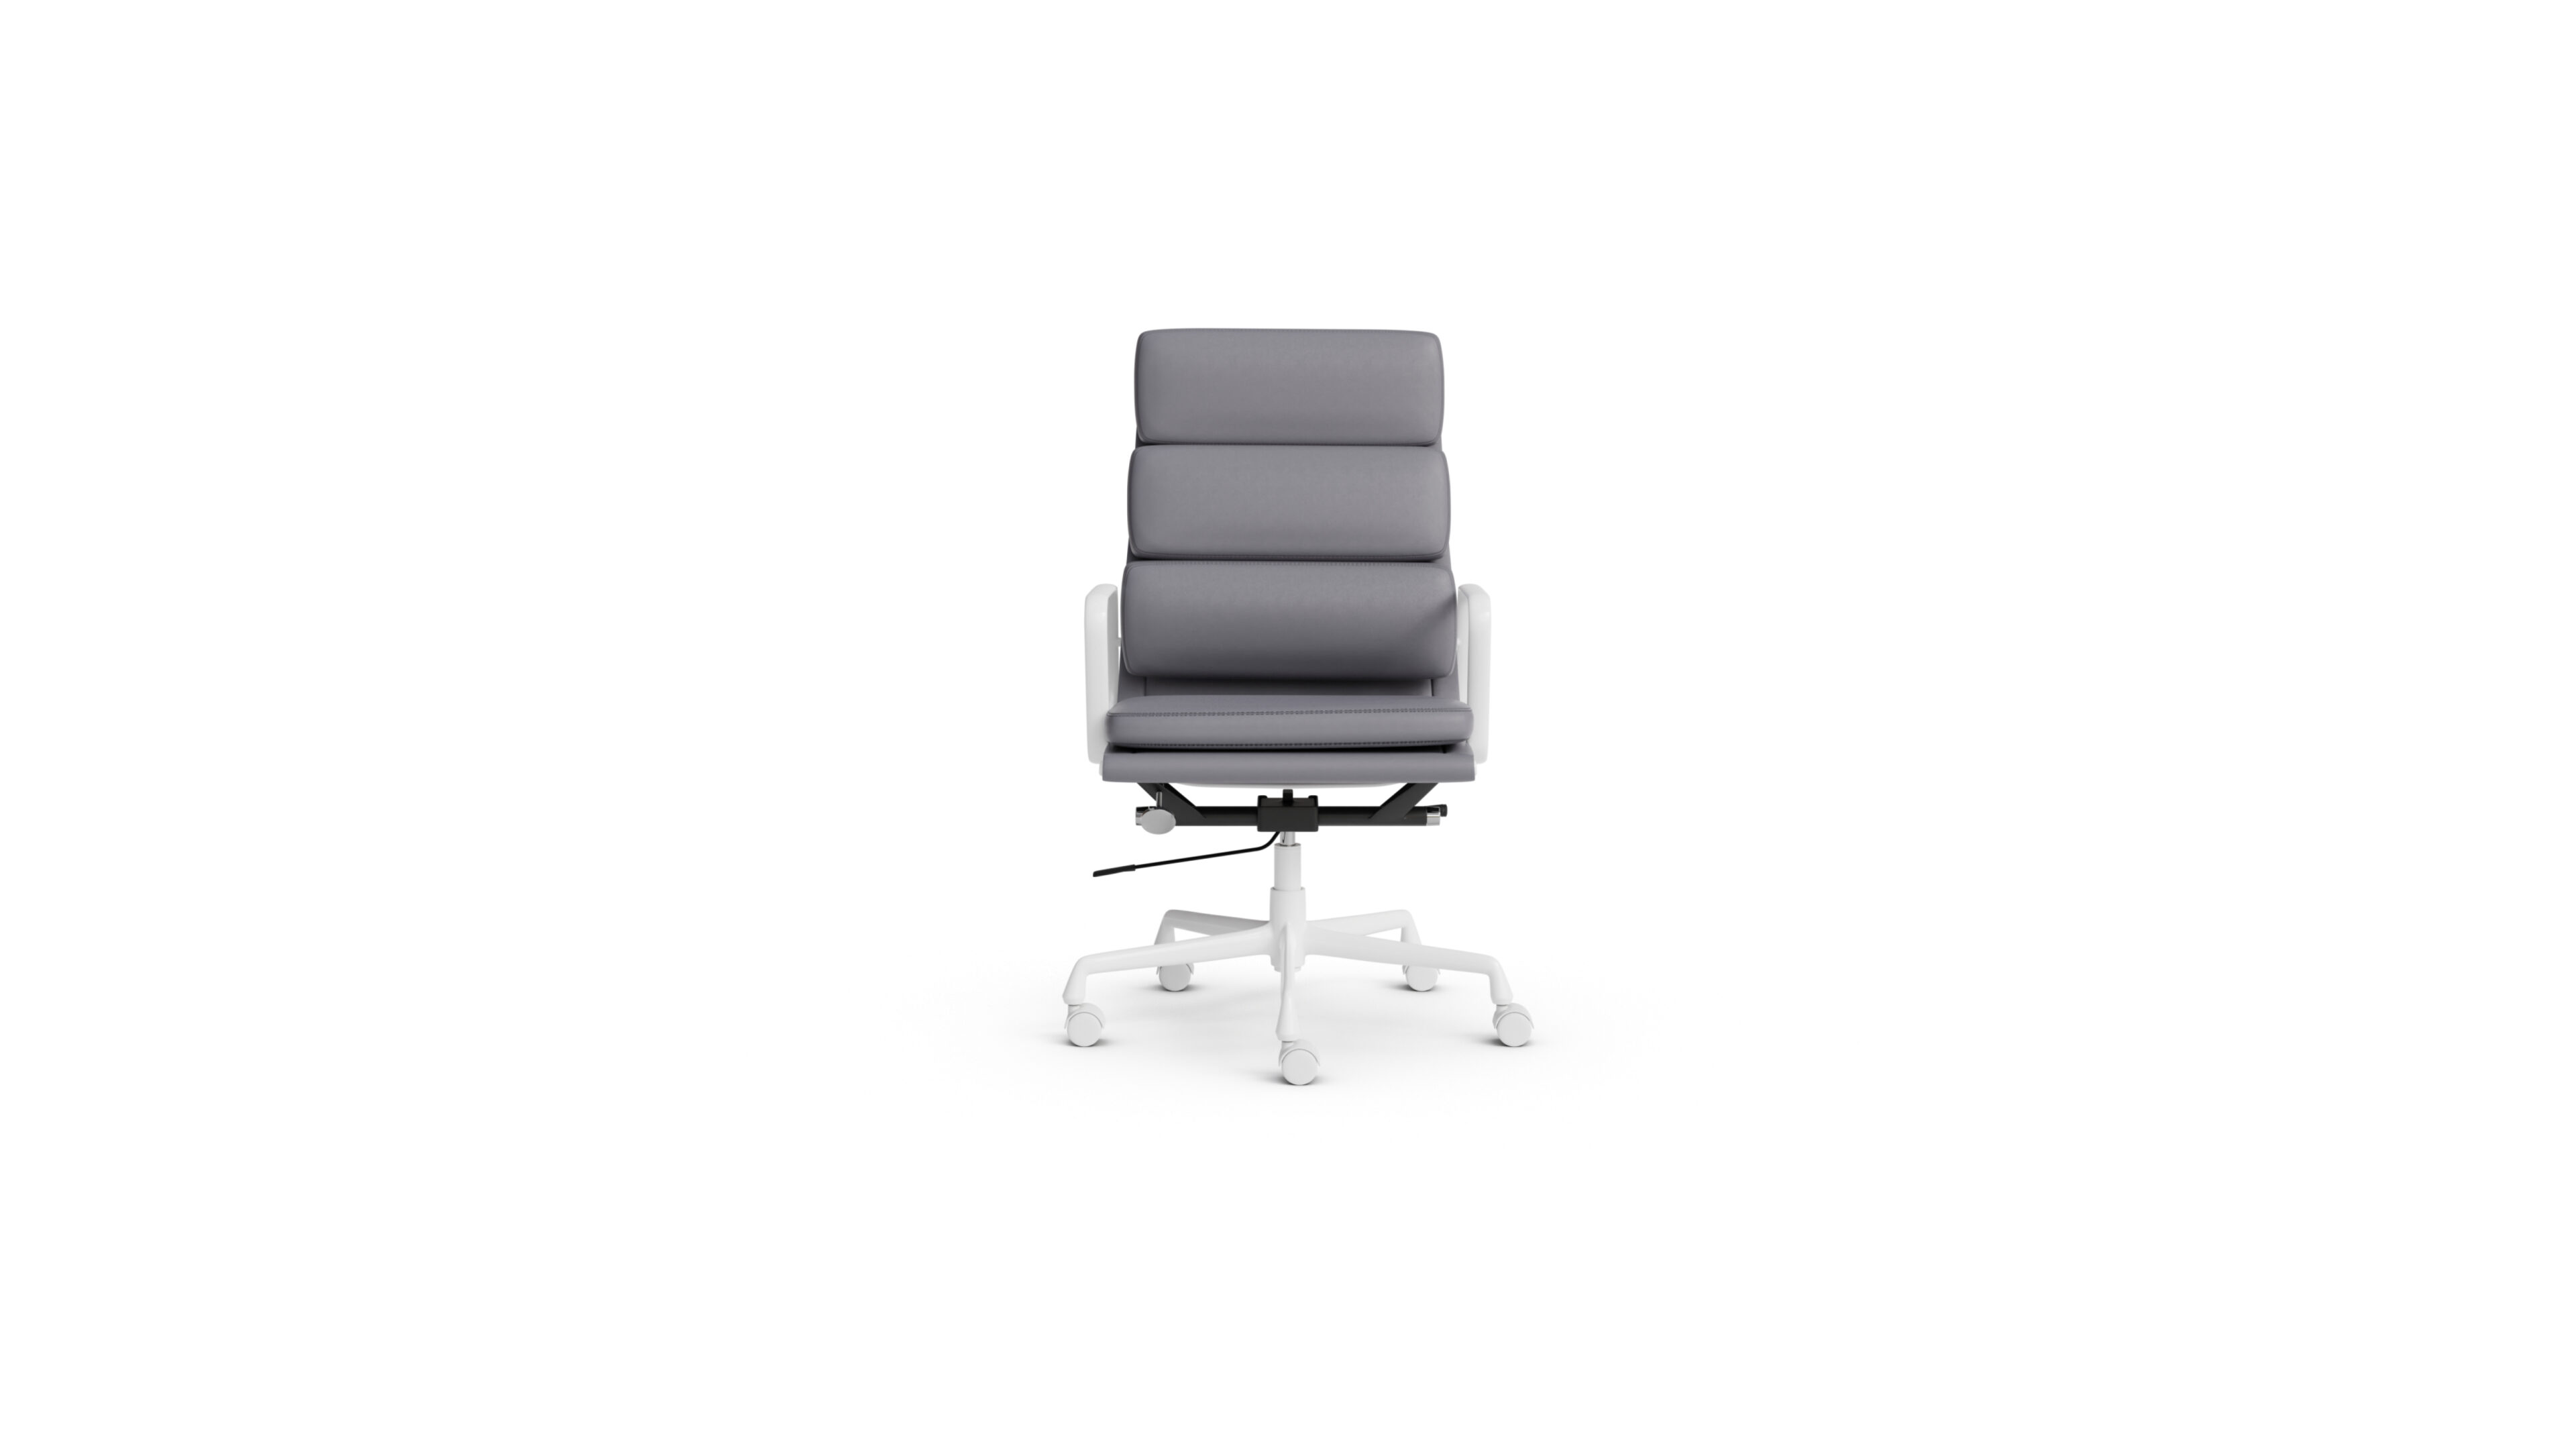 Eames Soft Pad Executive Chair EA 220 & EA437 On Castors, Pneumatic Lift Reproduction by Archetype Forms - Charles & Ray Eames - Front View